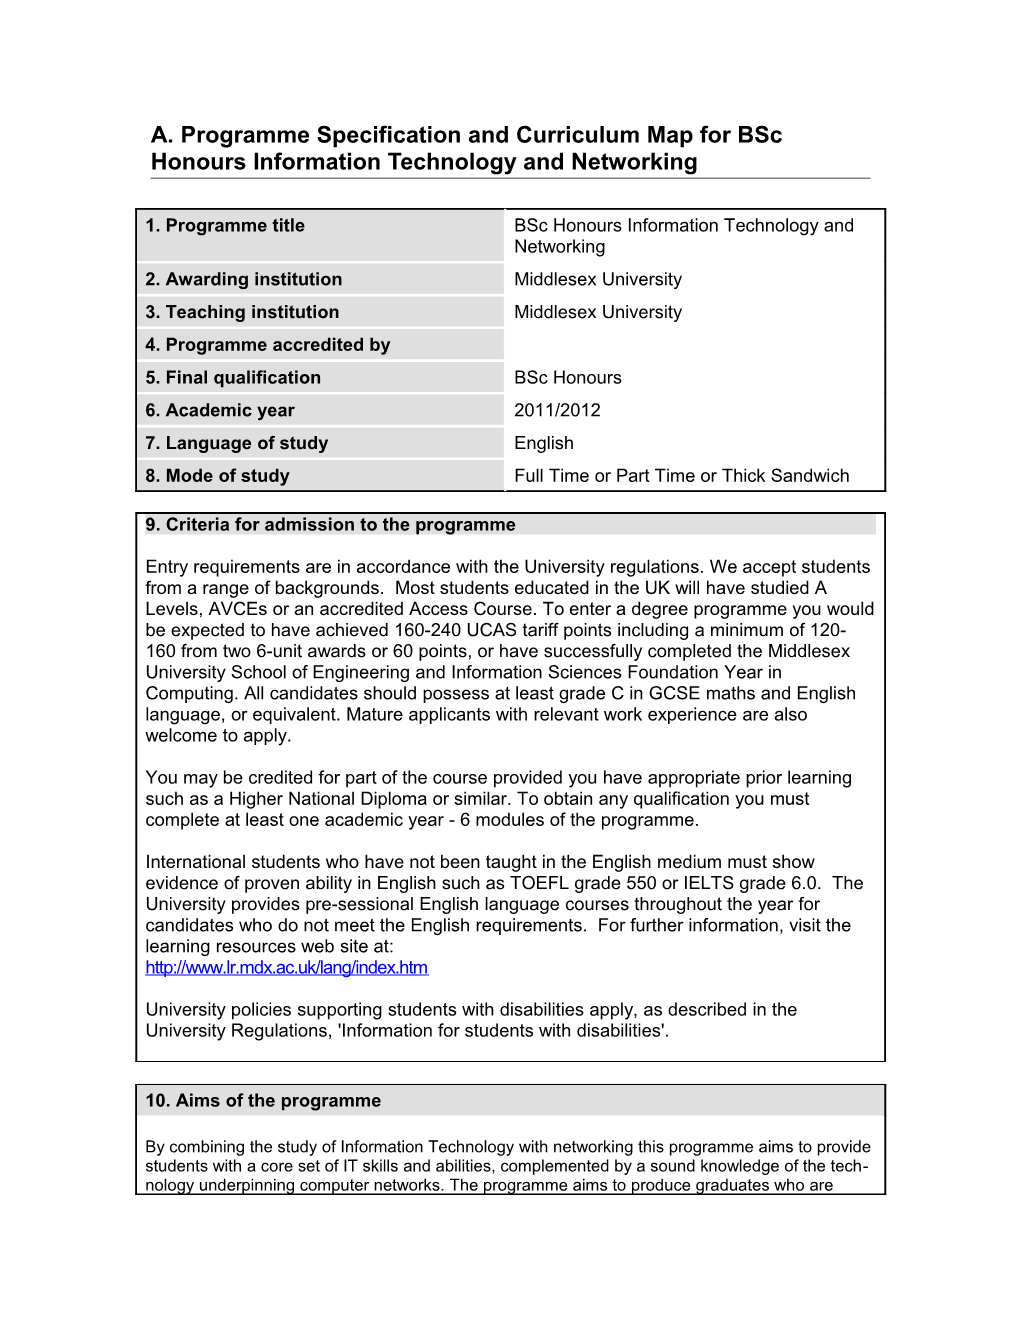 A. Programme Specification and Curriculum Map for Bsc Honoursinformation Technology And